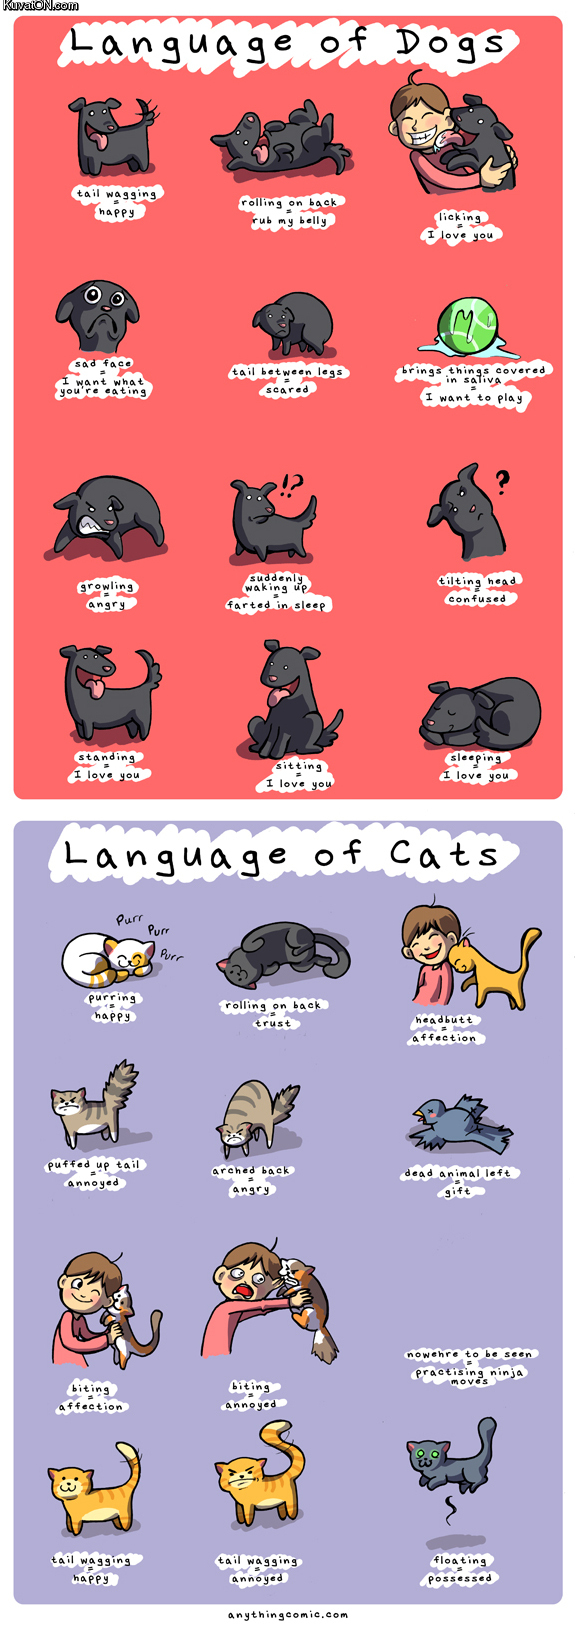 languages_of_dogs_and_cats.jpg